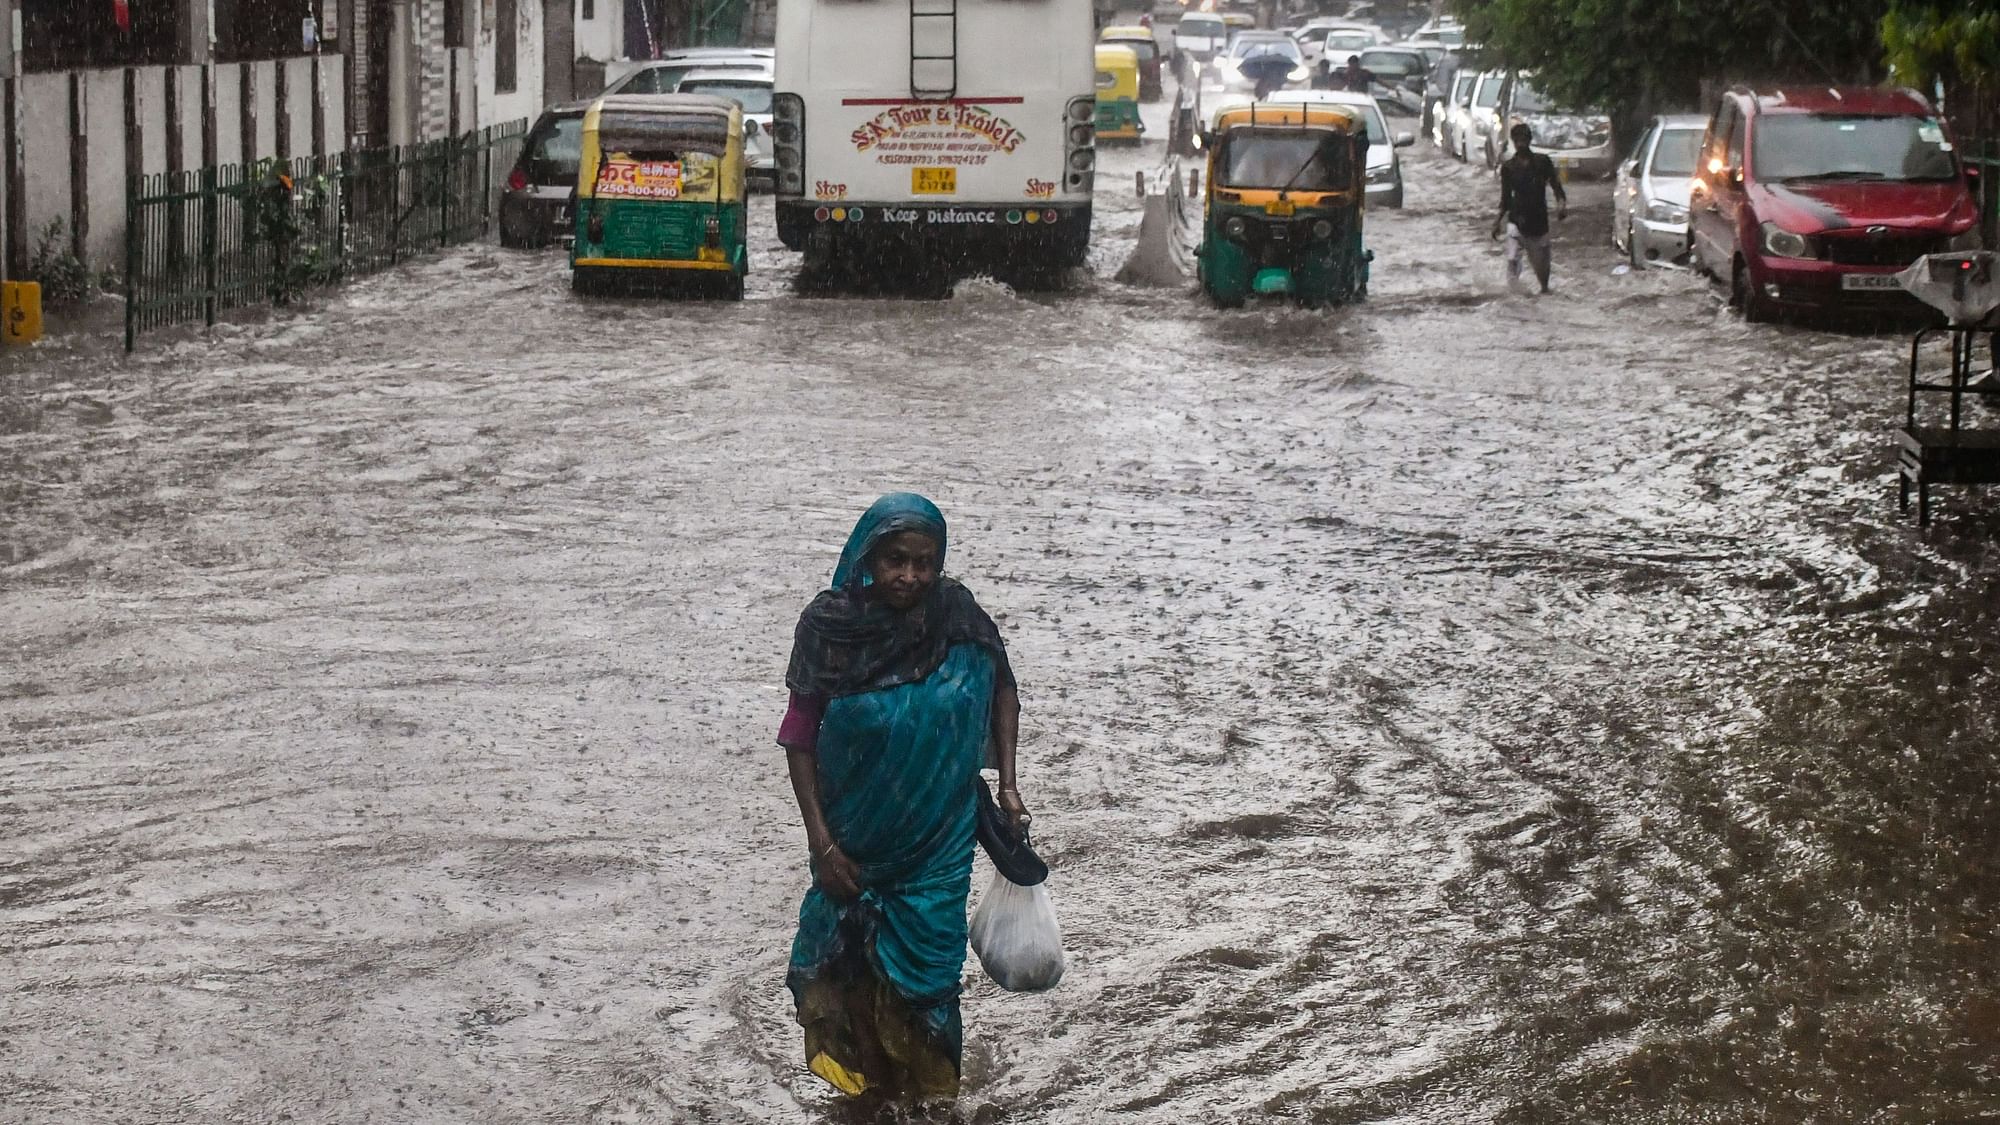 <div class="paragraphs"><p>The India Meteorological Department (IMD) has issued a 'yellow' alert for <a href="https://www.thequint.com/topic/delhi">Delhi</a> on Thursday, 21 July, predicting light to moderate rainfall in the city.</p></div>